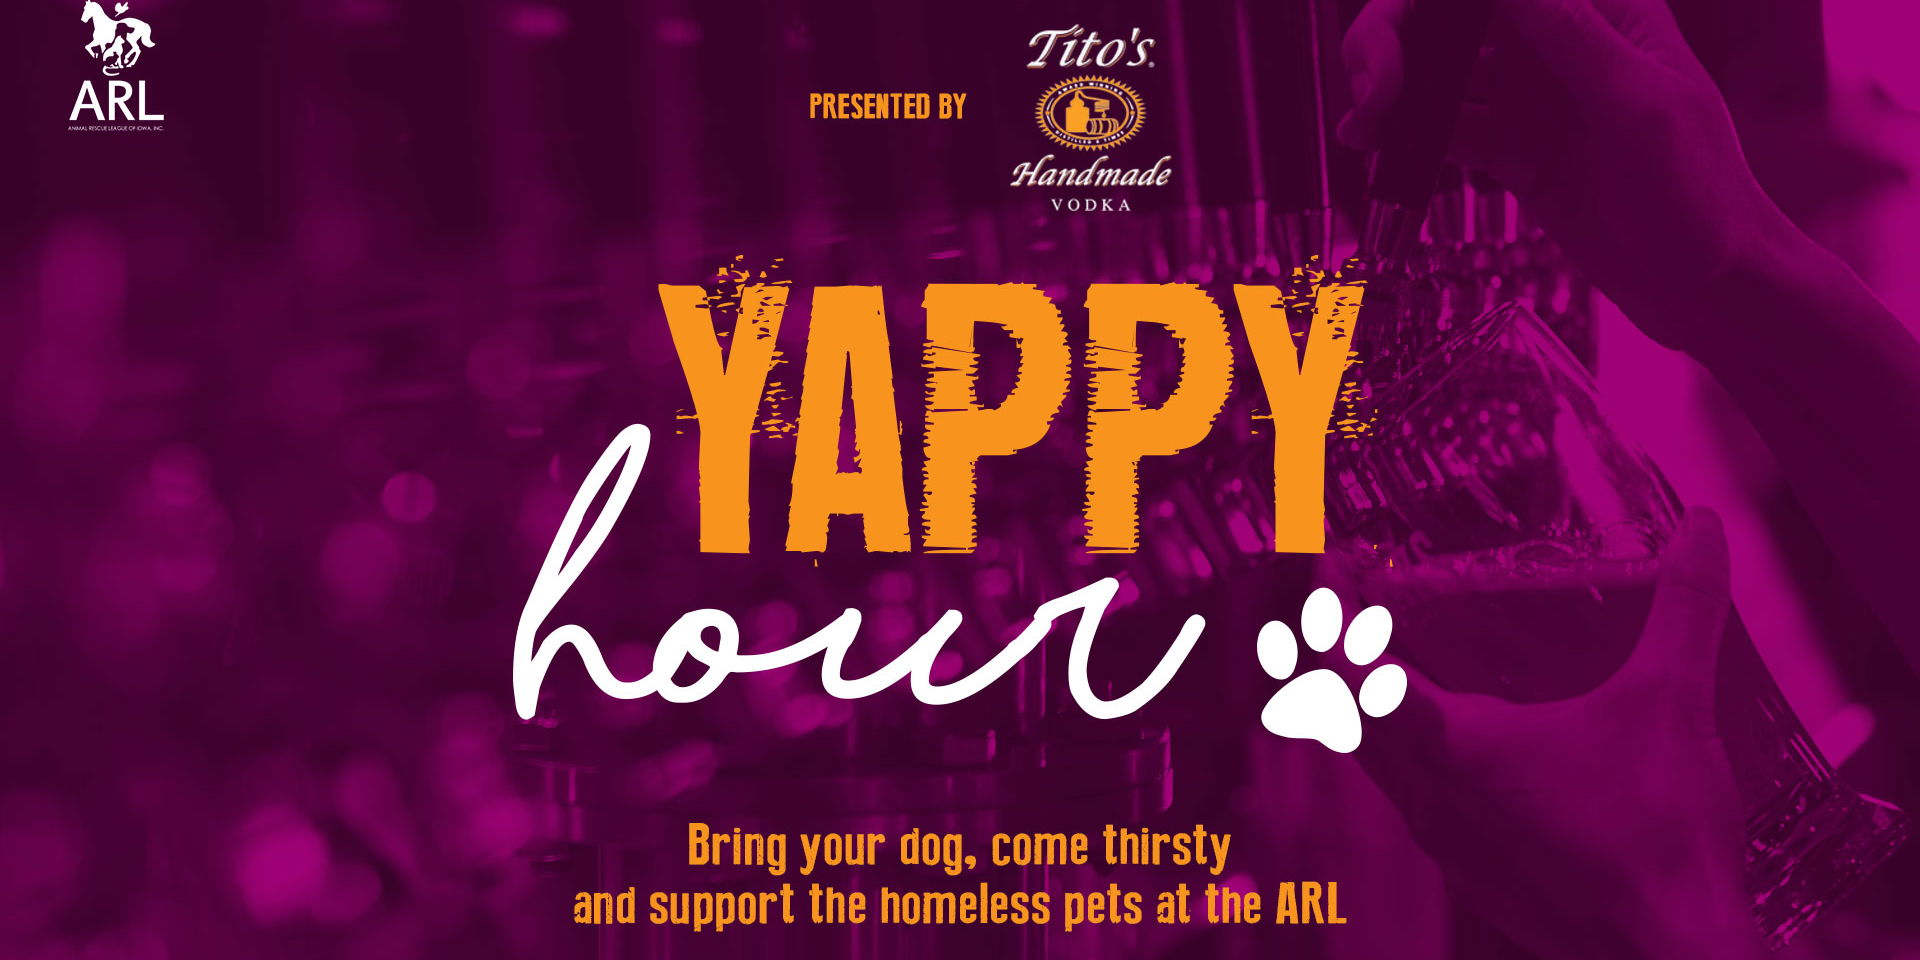 ARL Yappy Hour at Paws & Pints promotional image